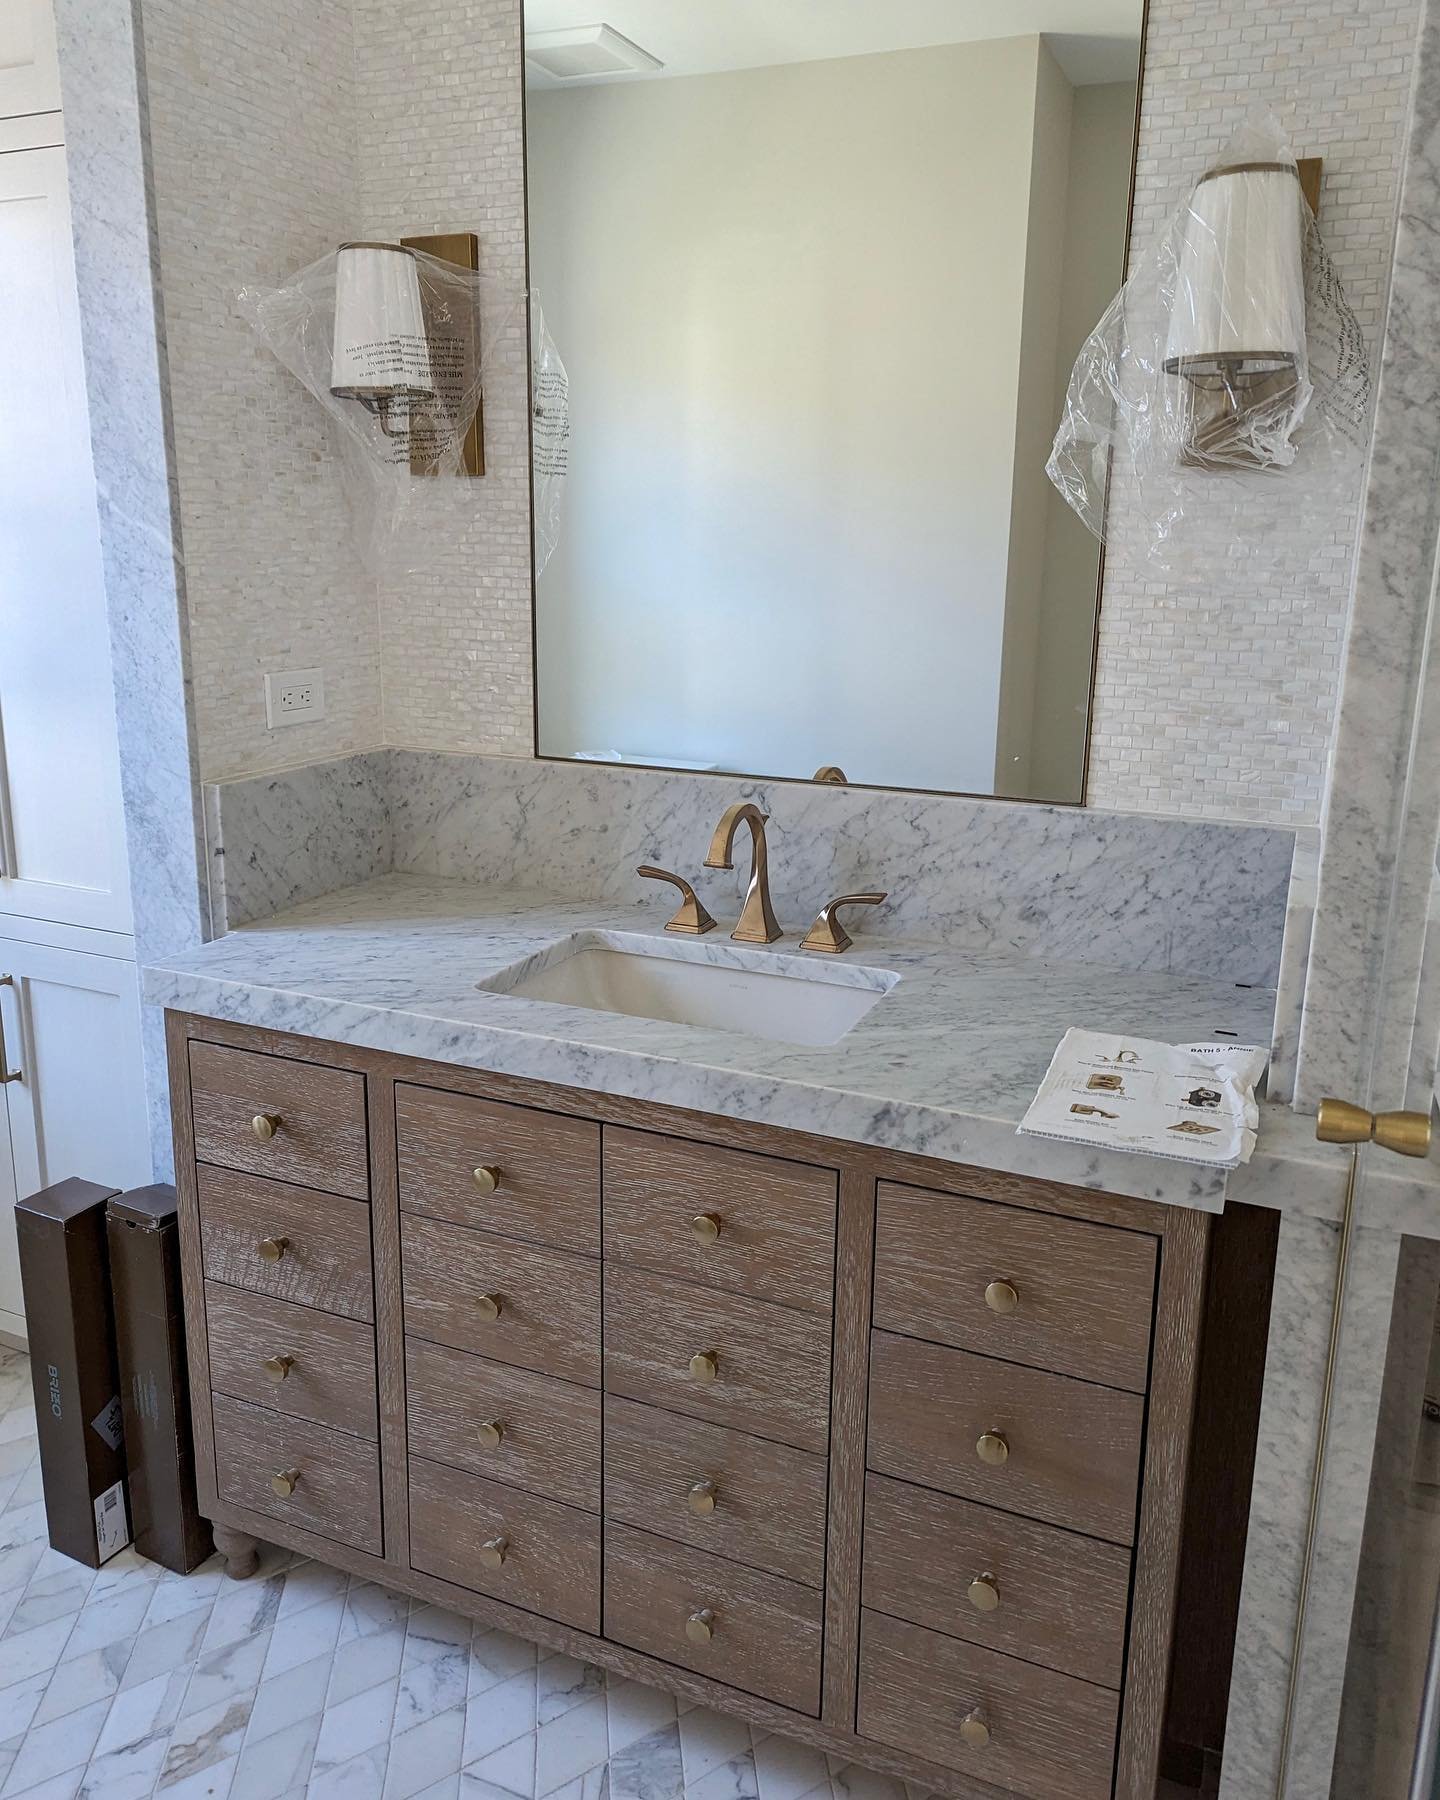 Gorgeous bathroom details from our @postroadfarmpa project!

Tile by @devontiledesignstudio 
Slabs by @aaa_hellenic_marble 
Cabinetry by @christianacabinetry 
Builder @pohlighomes 
Design by @abbyschwartzassociates